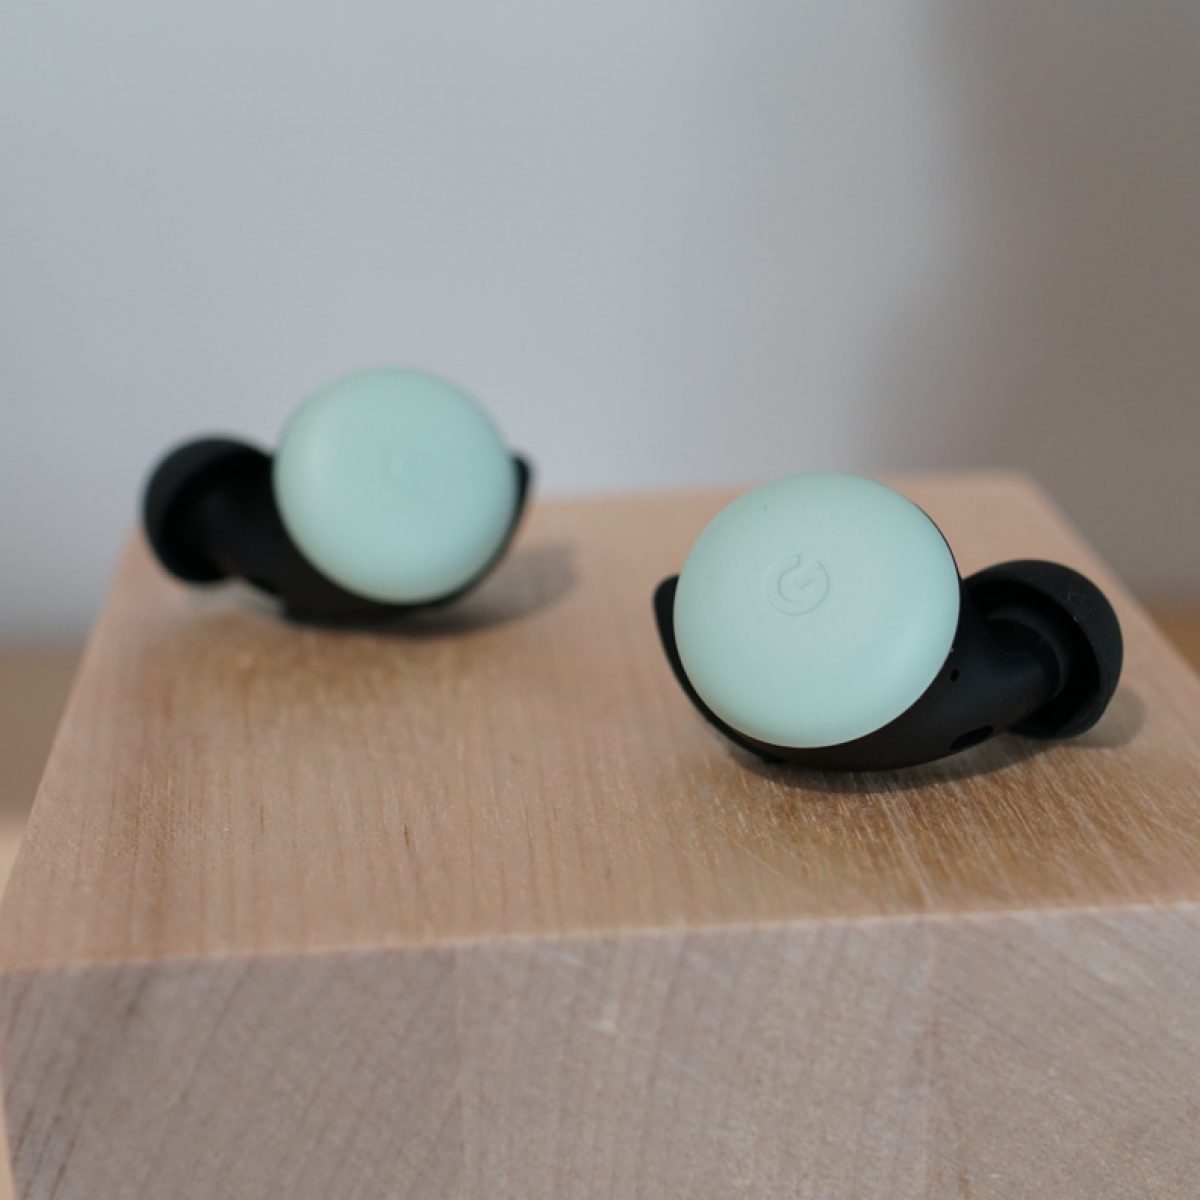 Google Pixel Buds Take on AirPods and Echo Buds Despite Premium